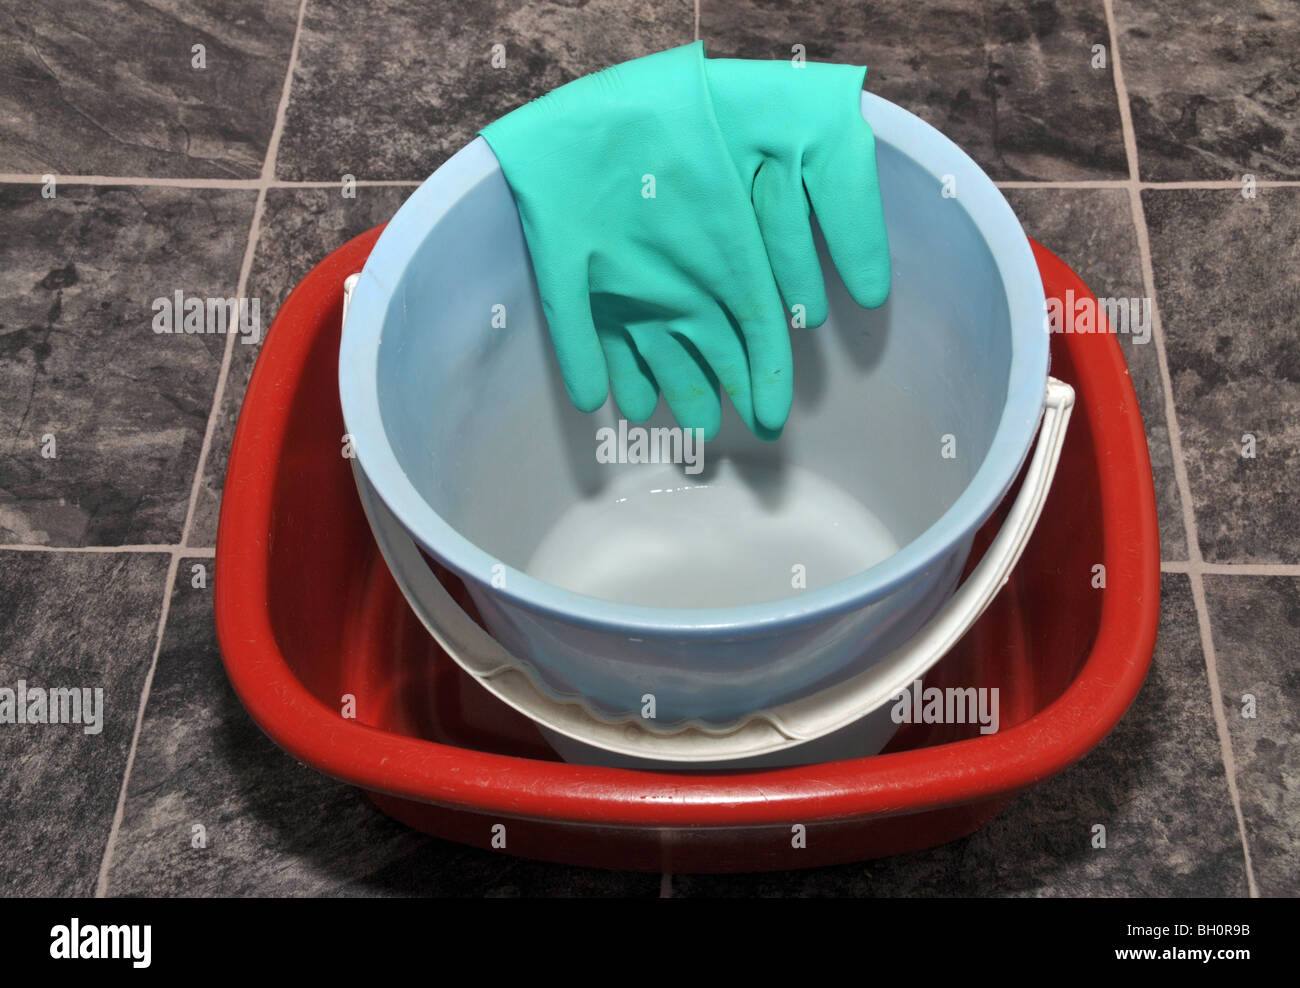 Plastic basin and washing pail with rubber gloves. Stock Photo